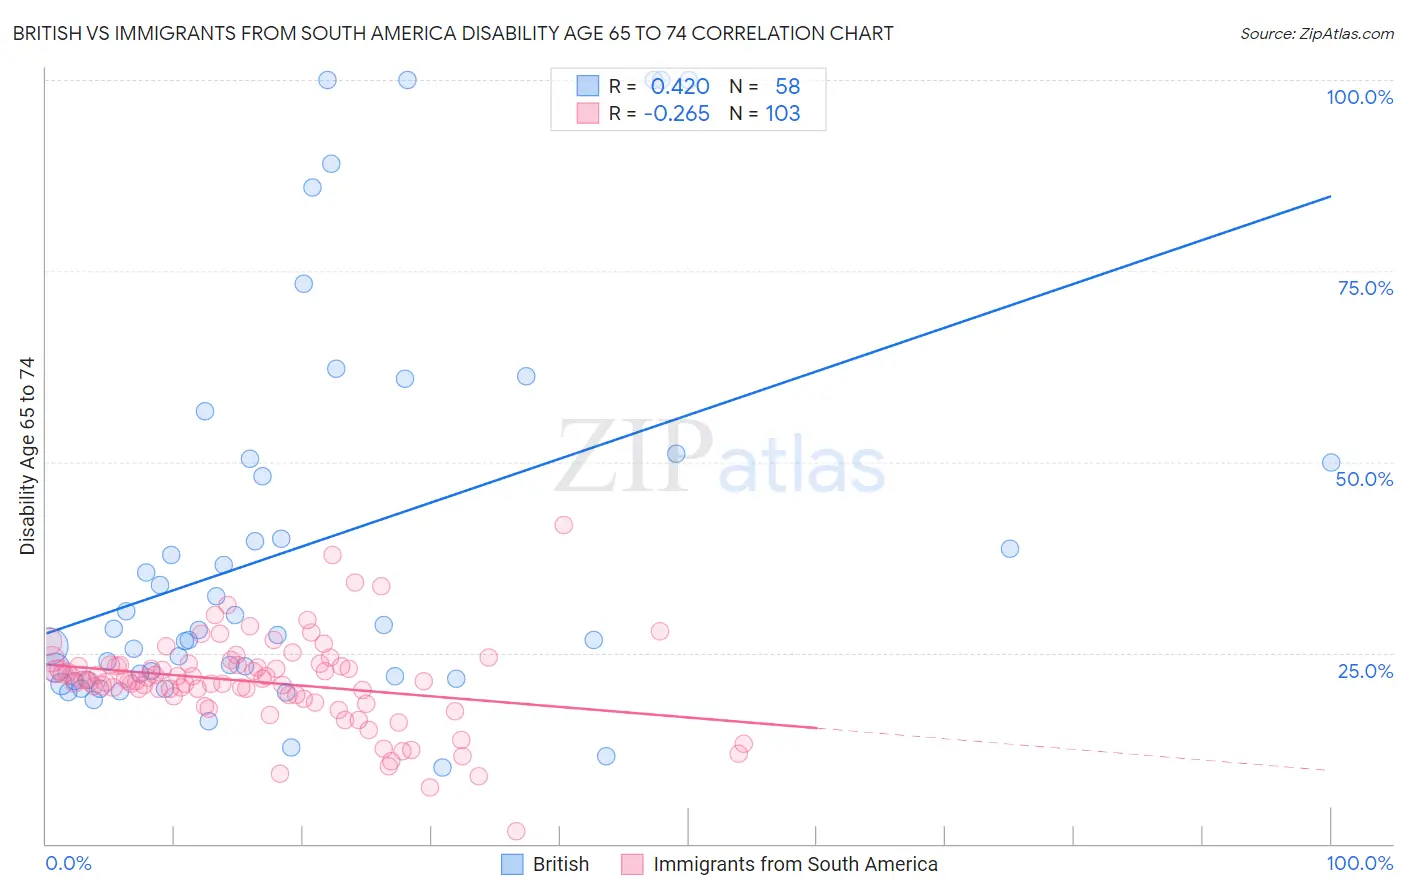 British vs Immigrants from South America Disability Age 65 to 74